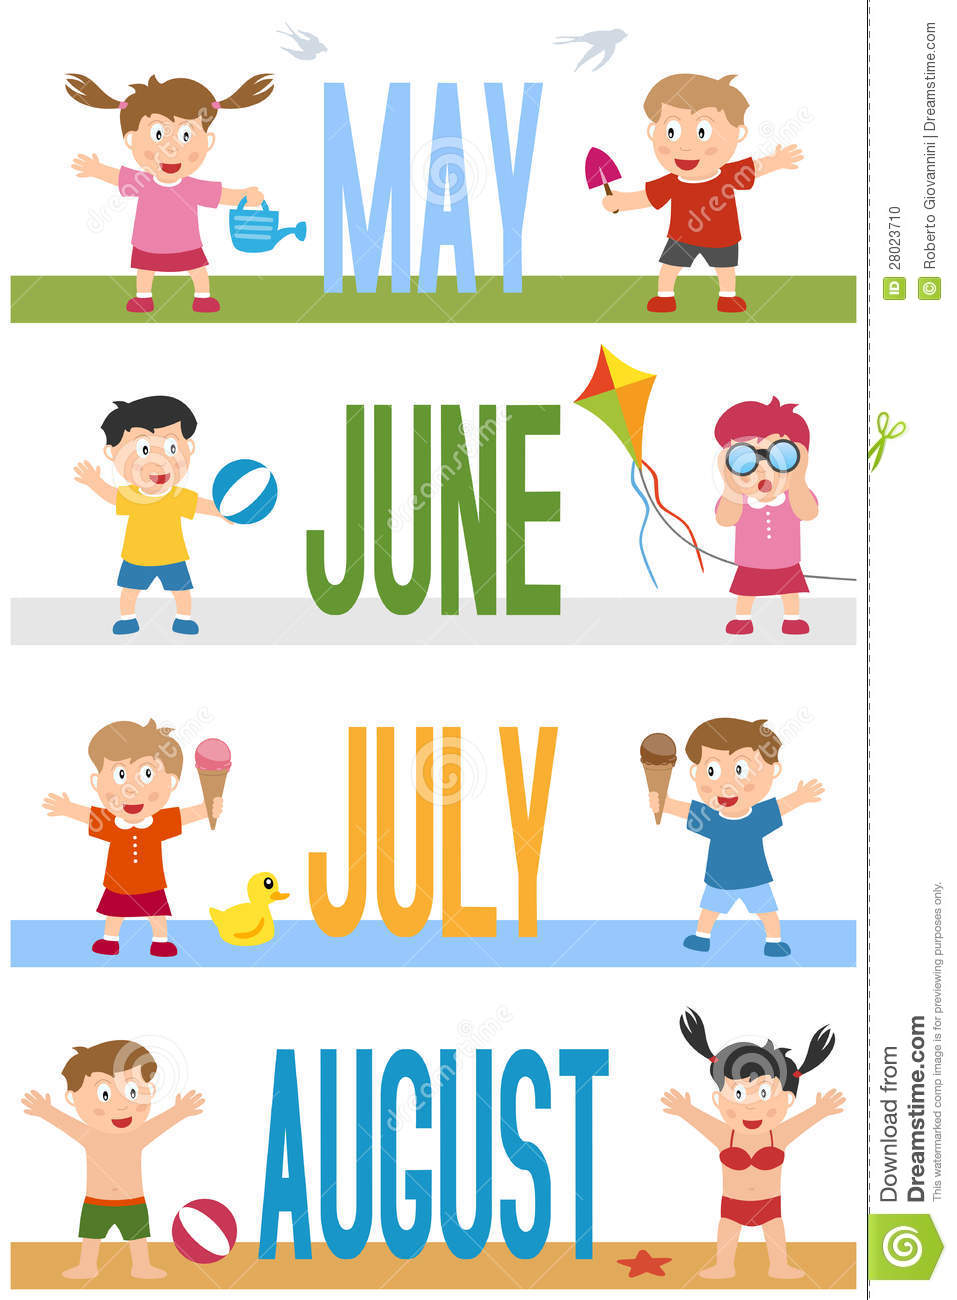 Month Of July Clipart Months Banners With Kids